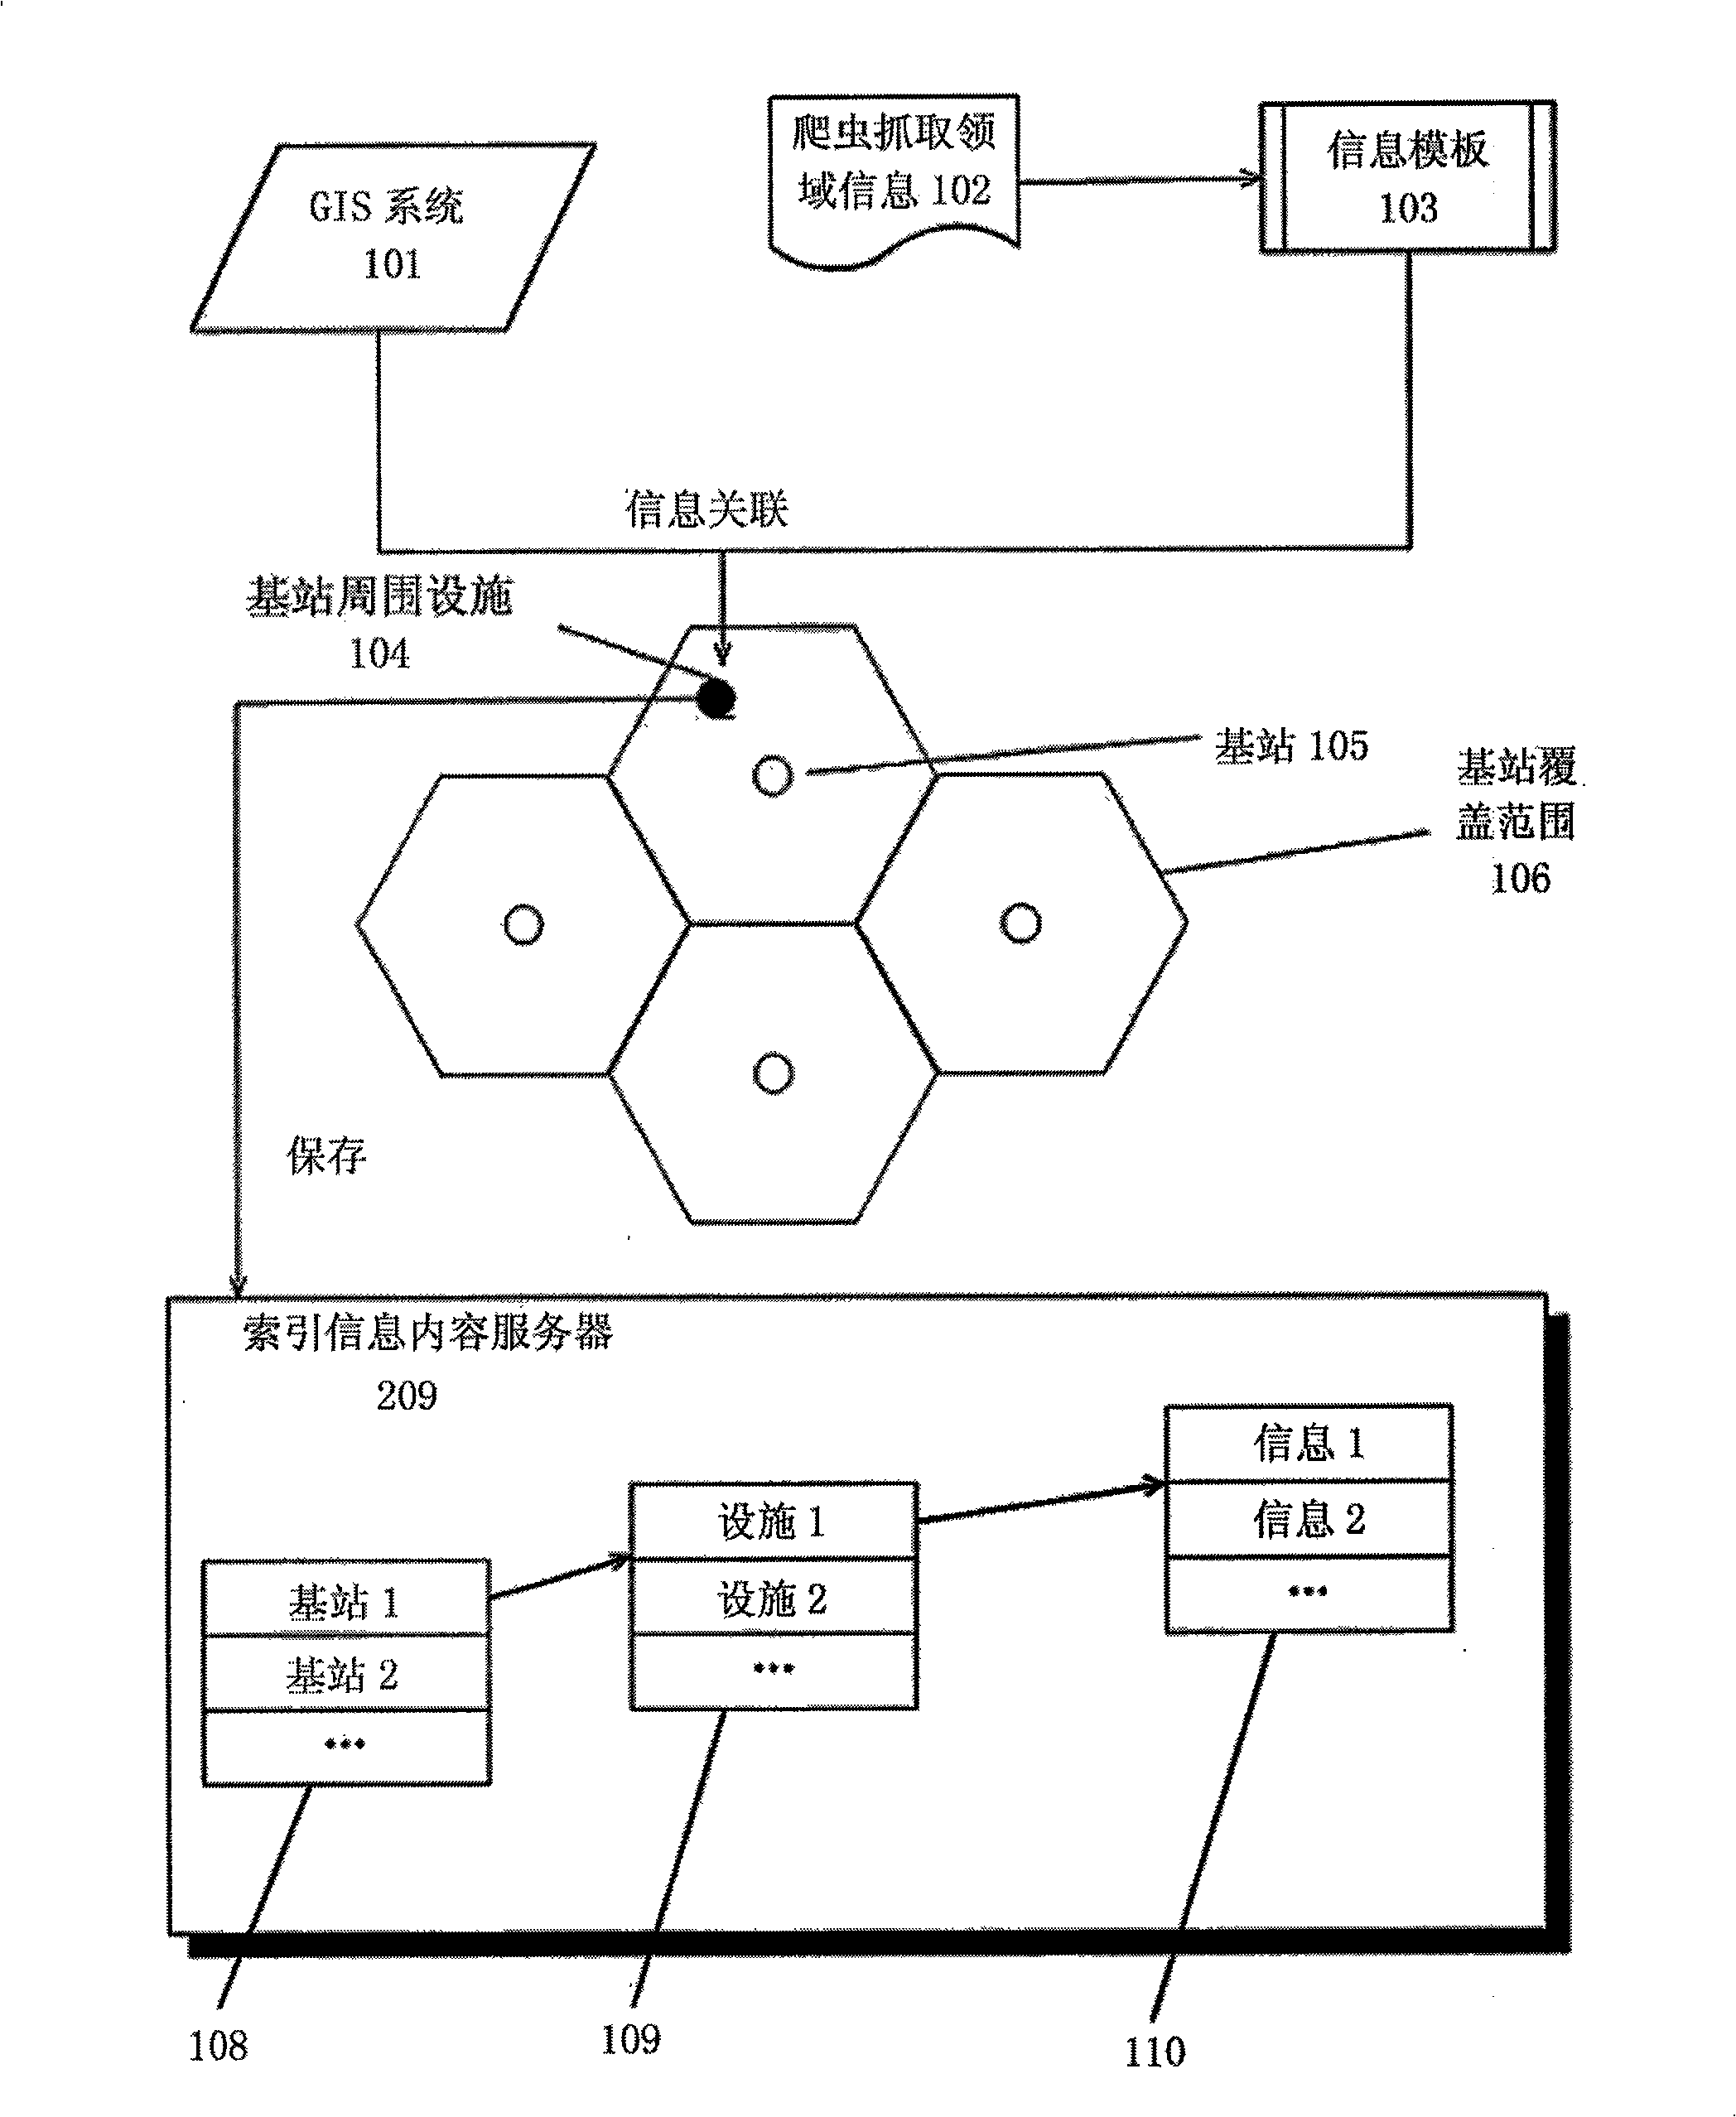 System and method for collecting, indexing, subscribing and publishing mobile terminal information